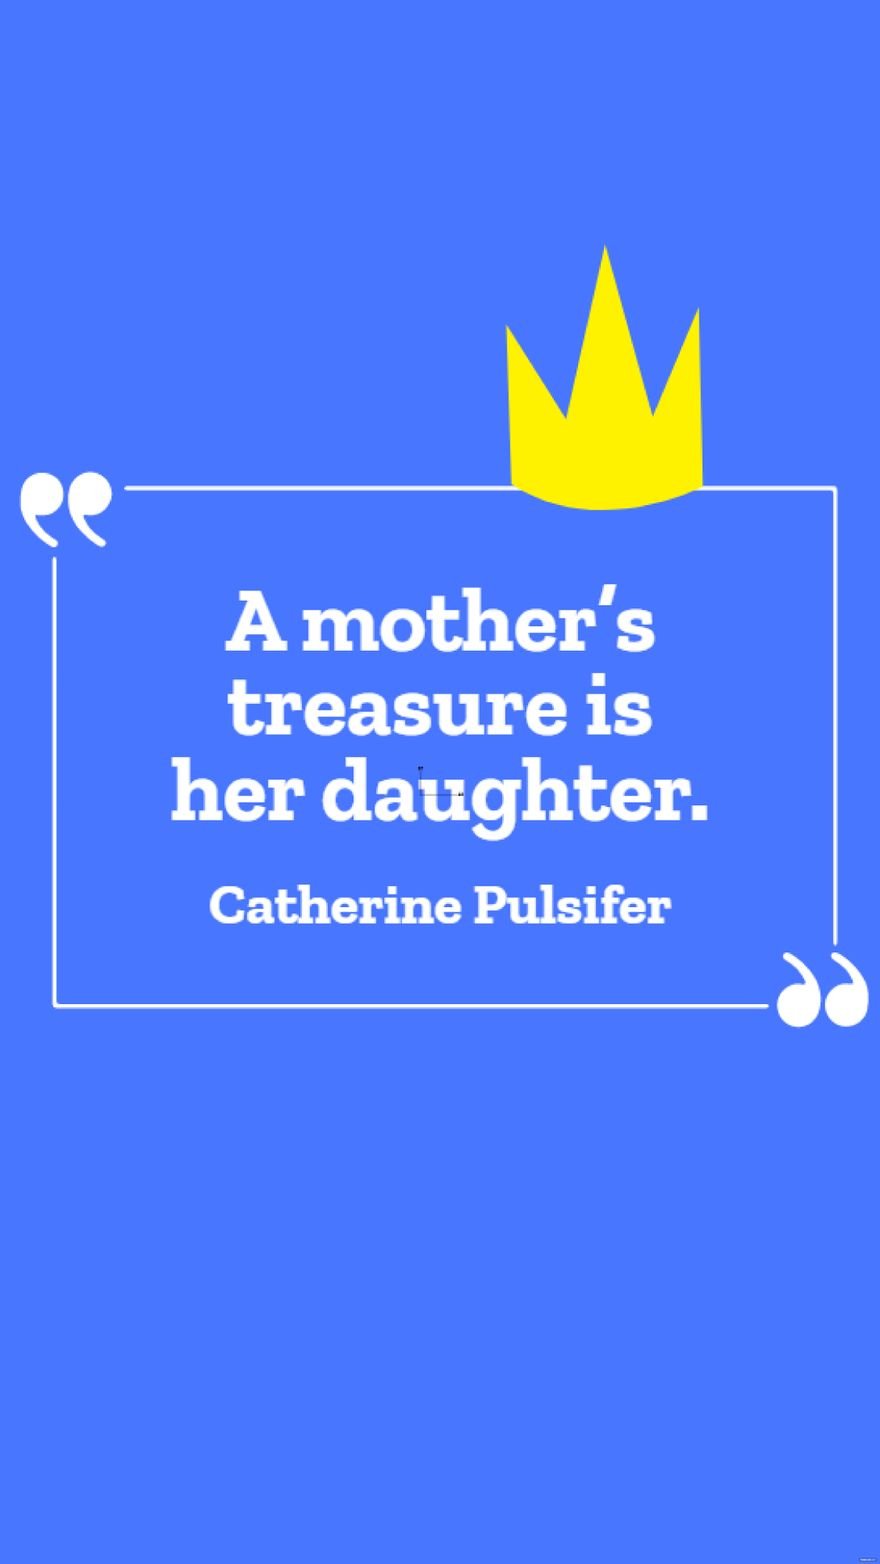 Free Catherine Pulsifer - A mother’s treasure is her daughter.